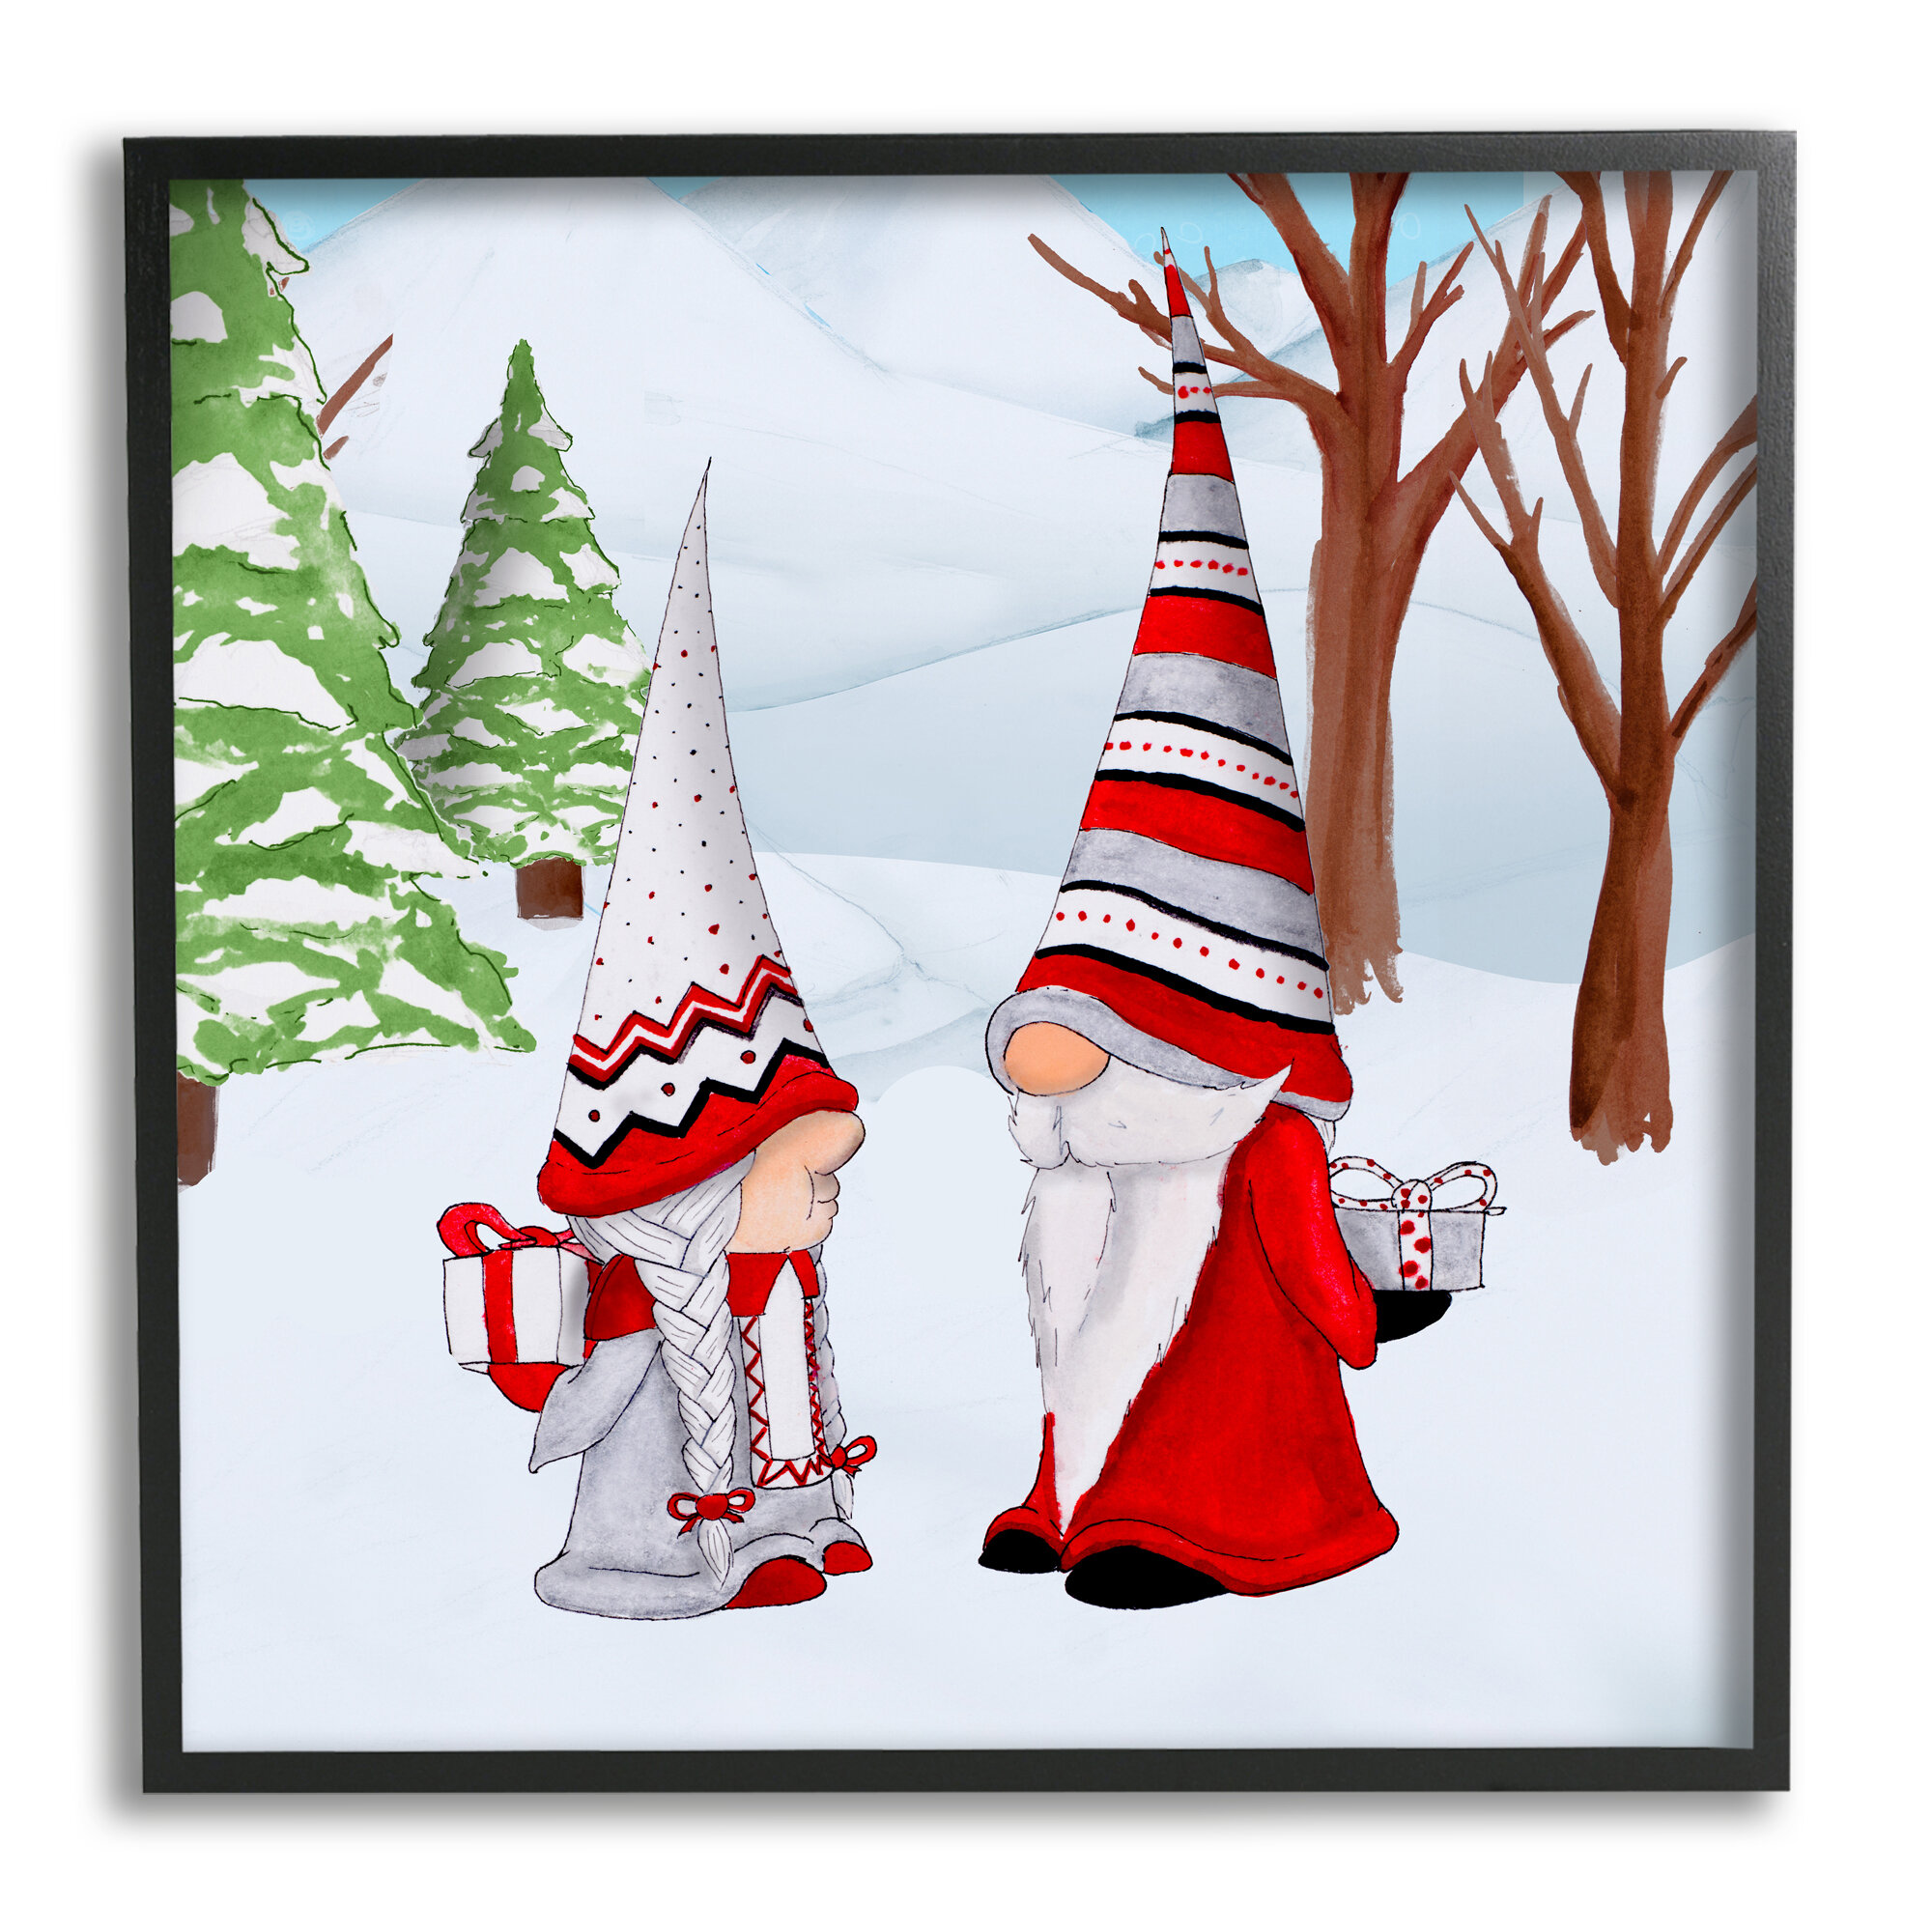 Stupell Industries Festive Winter Gnome Couple Holiday Presents Garden Elf  Framed On Canvas by Hugo Edwins Print